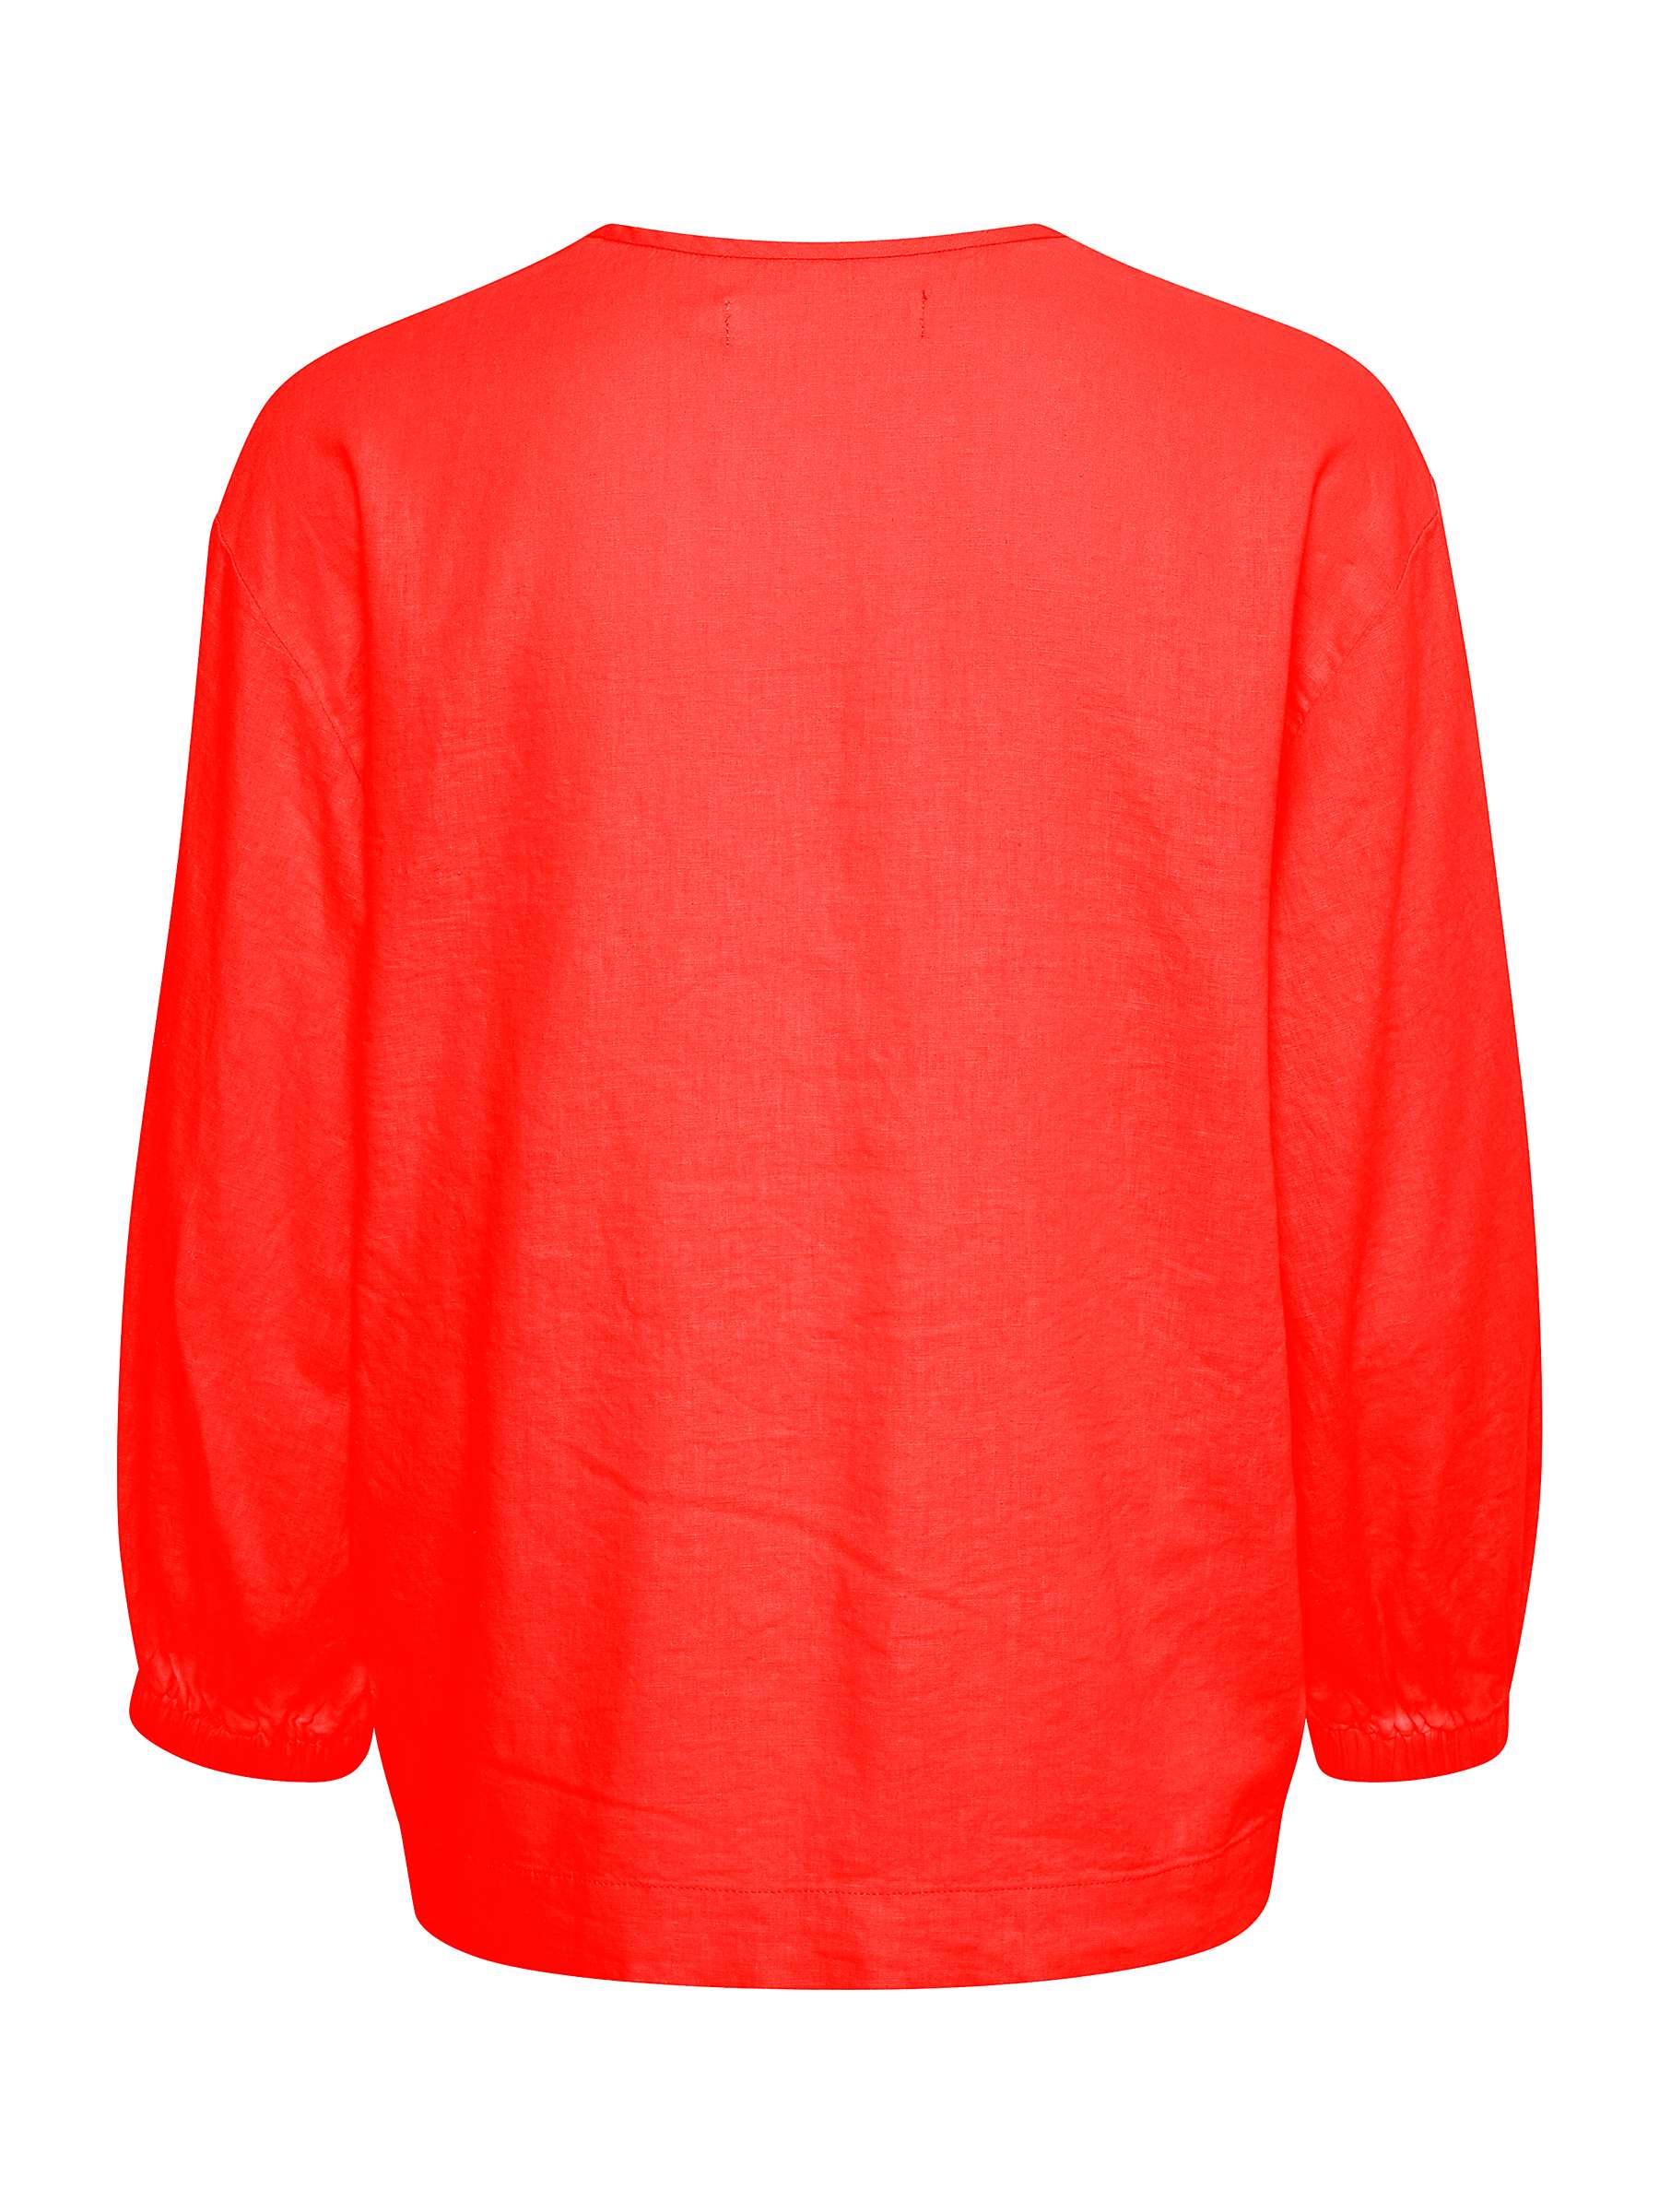 Buy InWear Pattie 3/4 Sleeve Relaxed Fit Top, Cherry Tomato Online at johnlewis.com